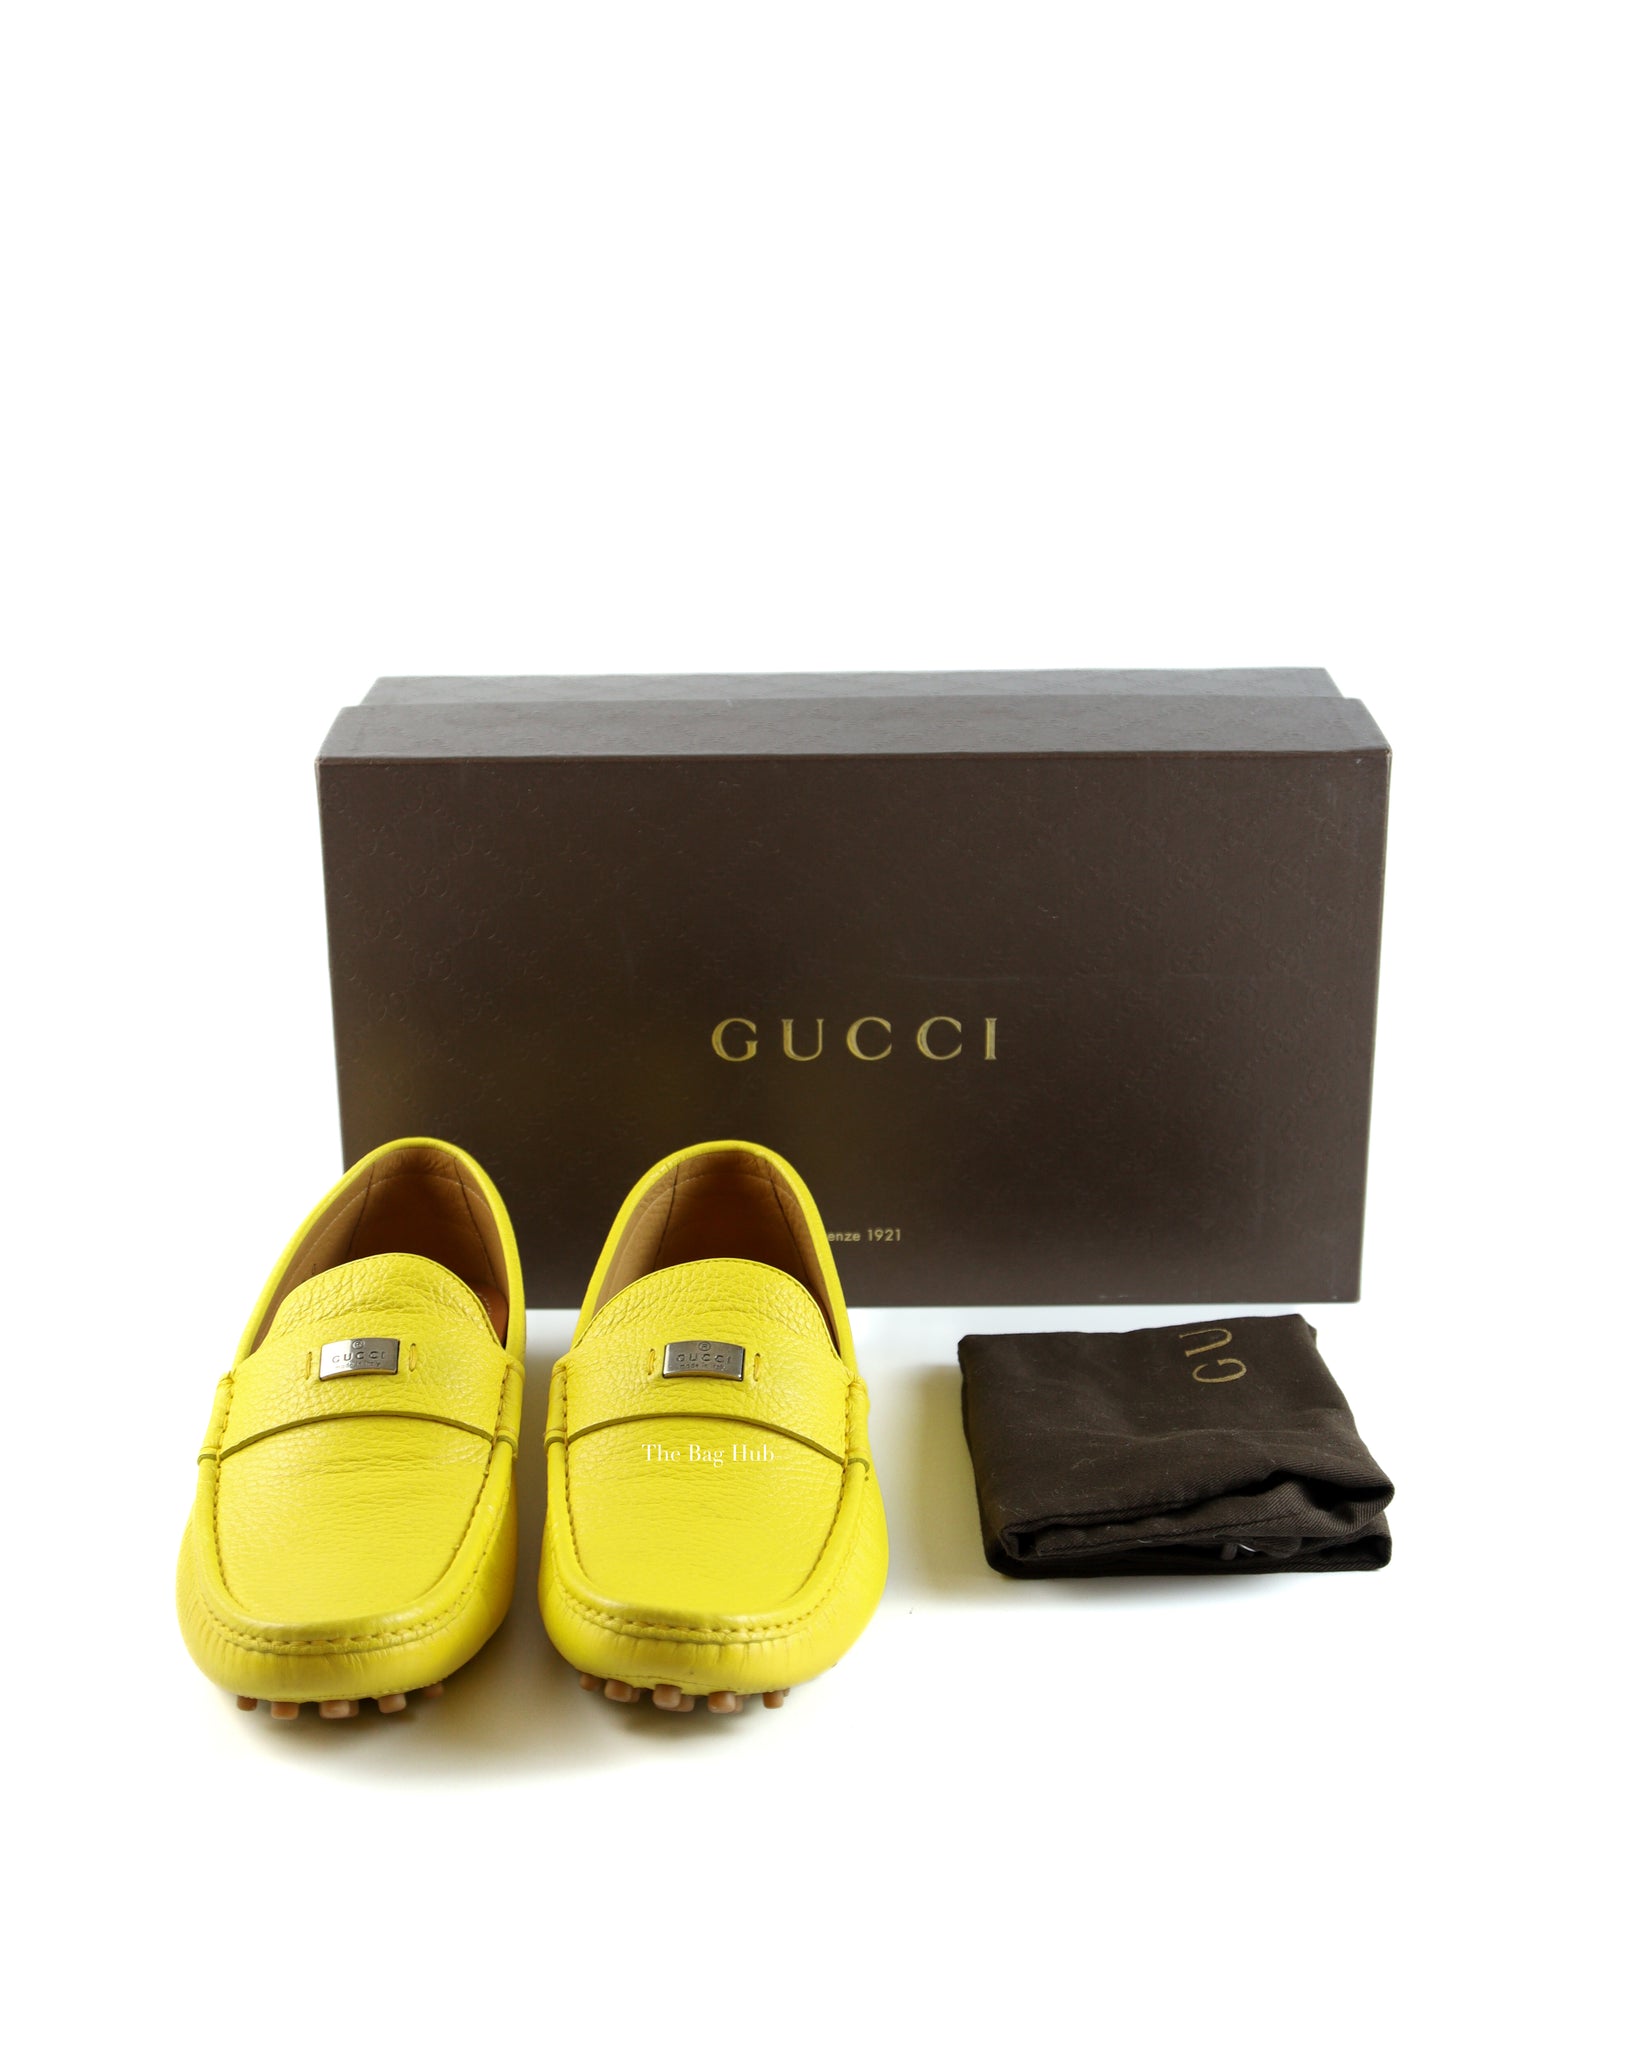 Gucci Yellow New Men's Driving Loafers Size 38.5-9